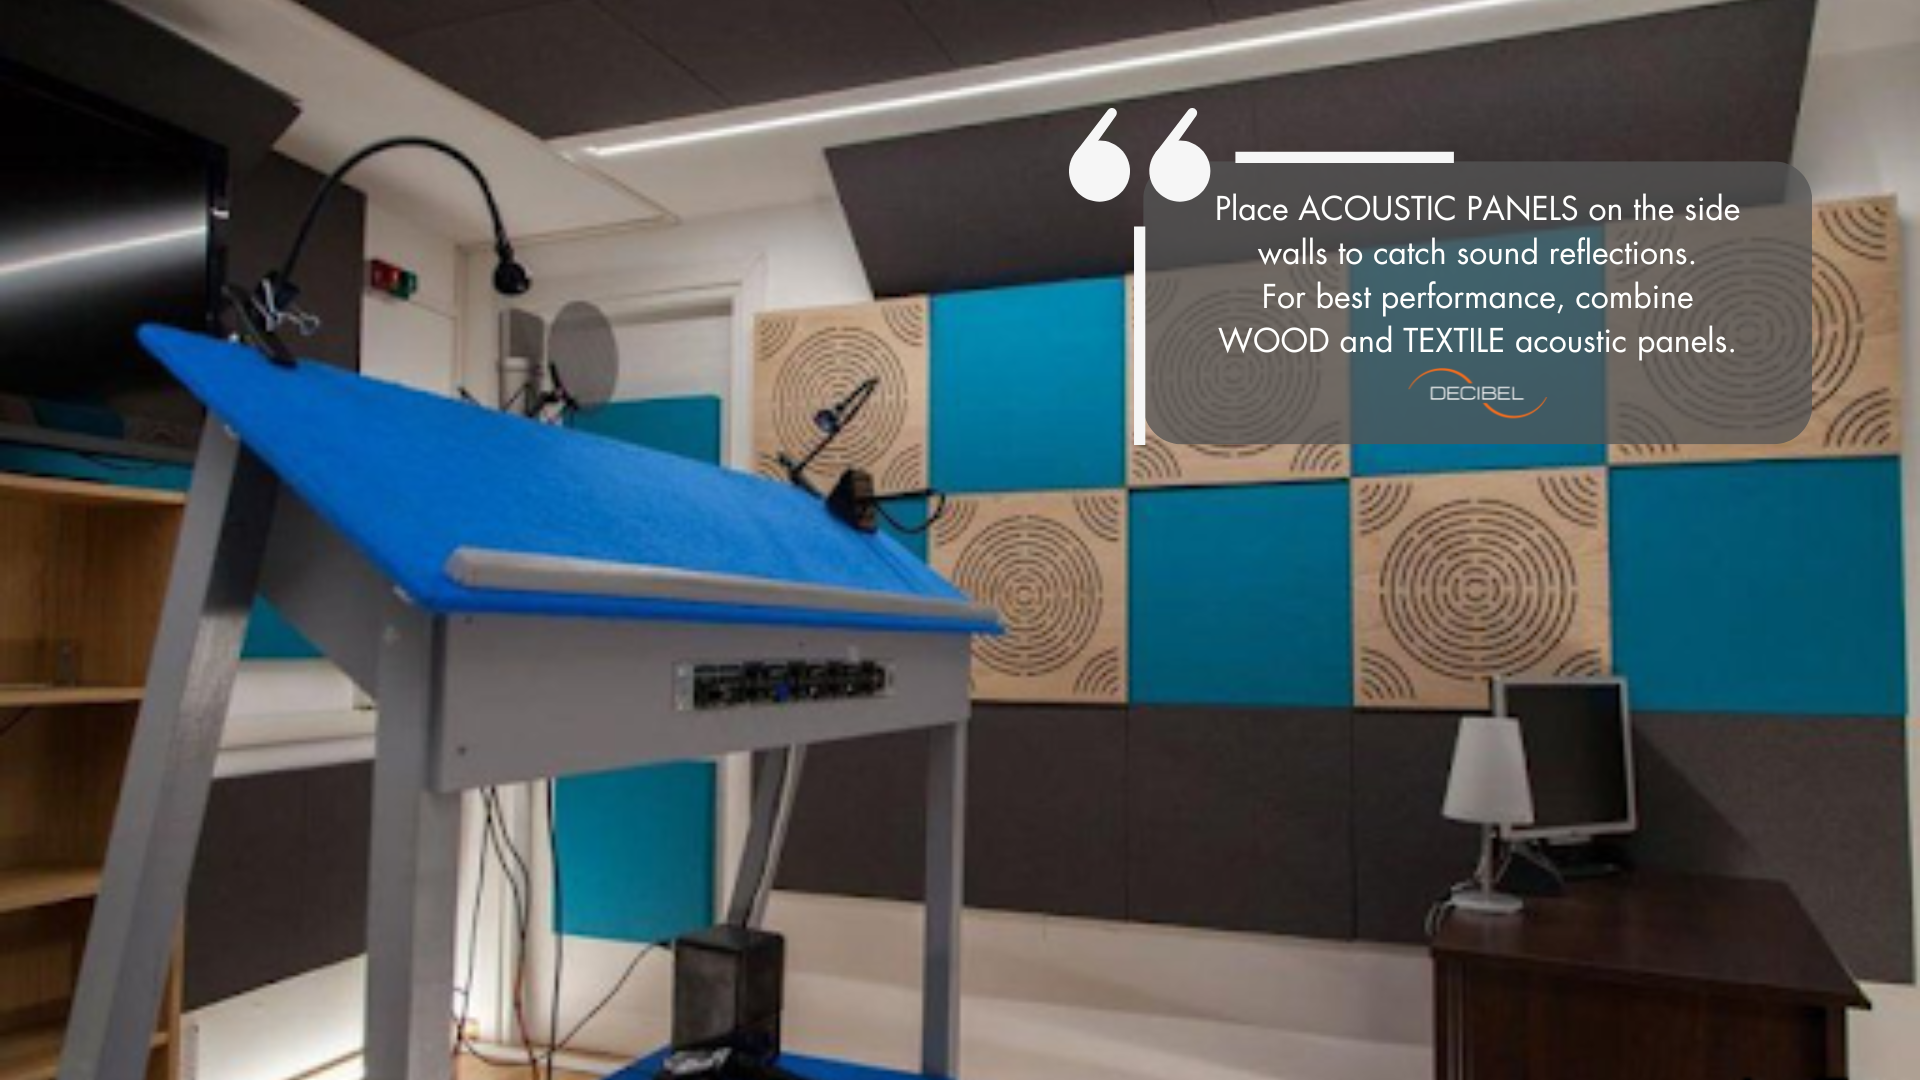 Combination of textile and wood acoustic panels in studio